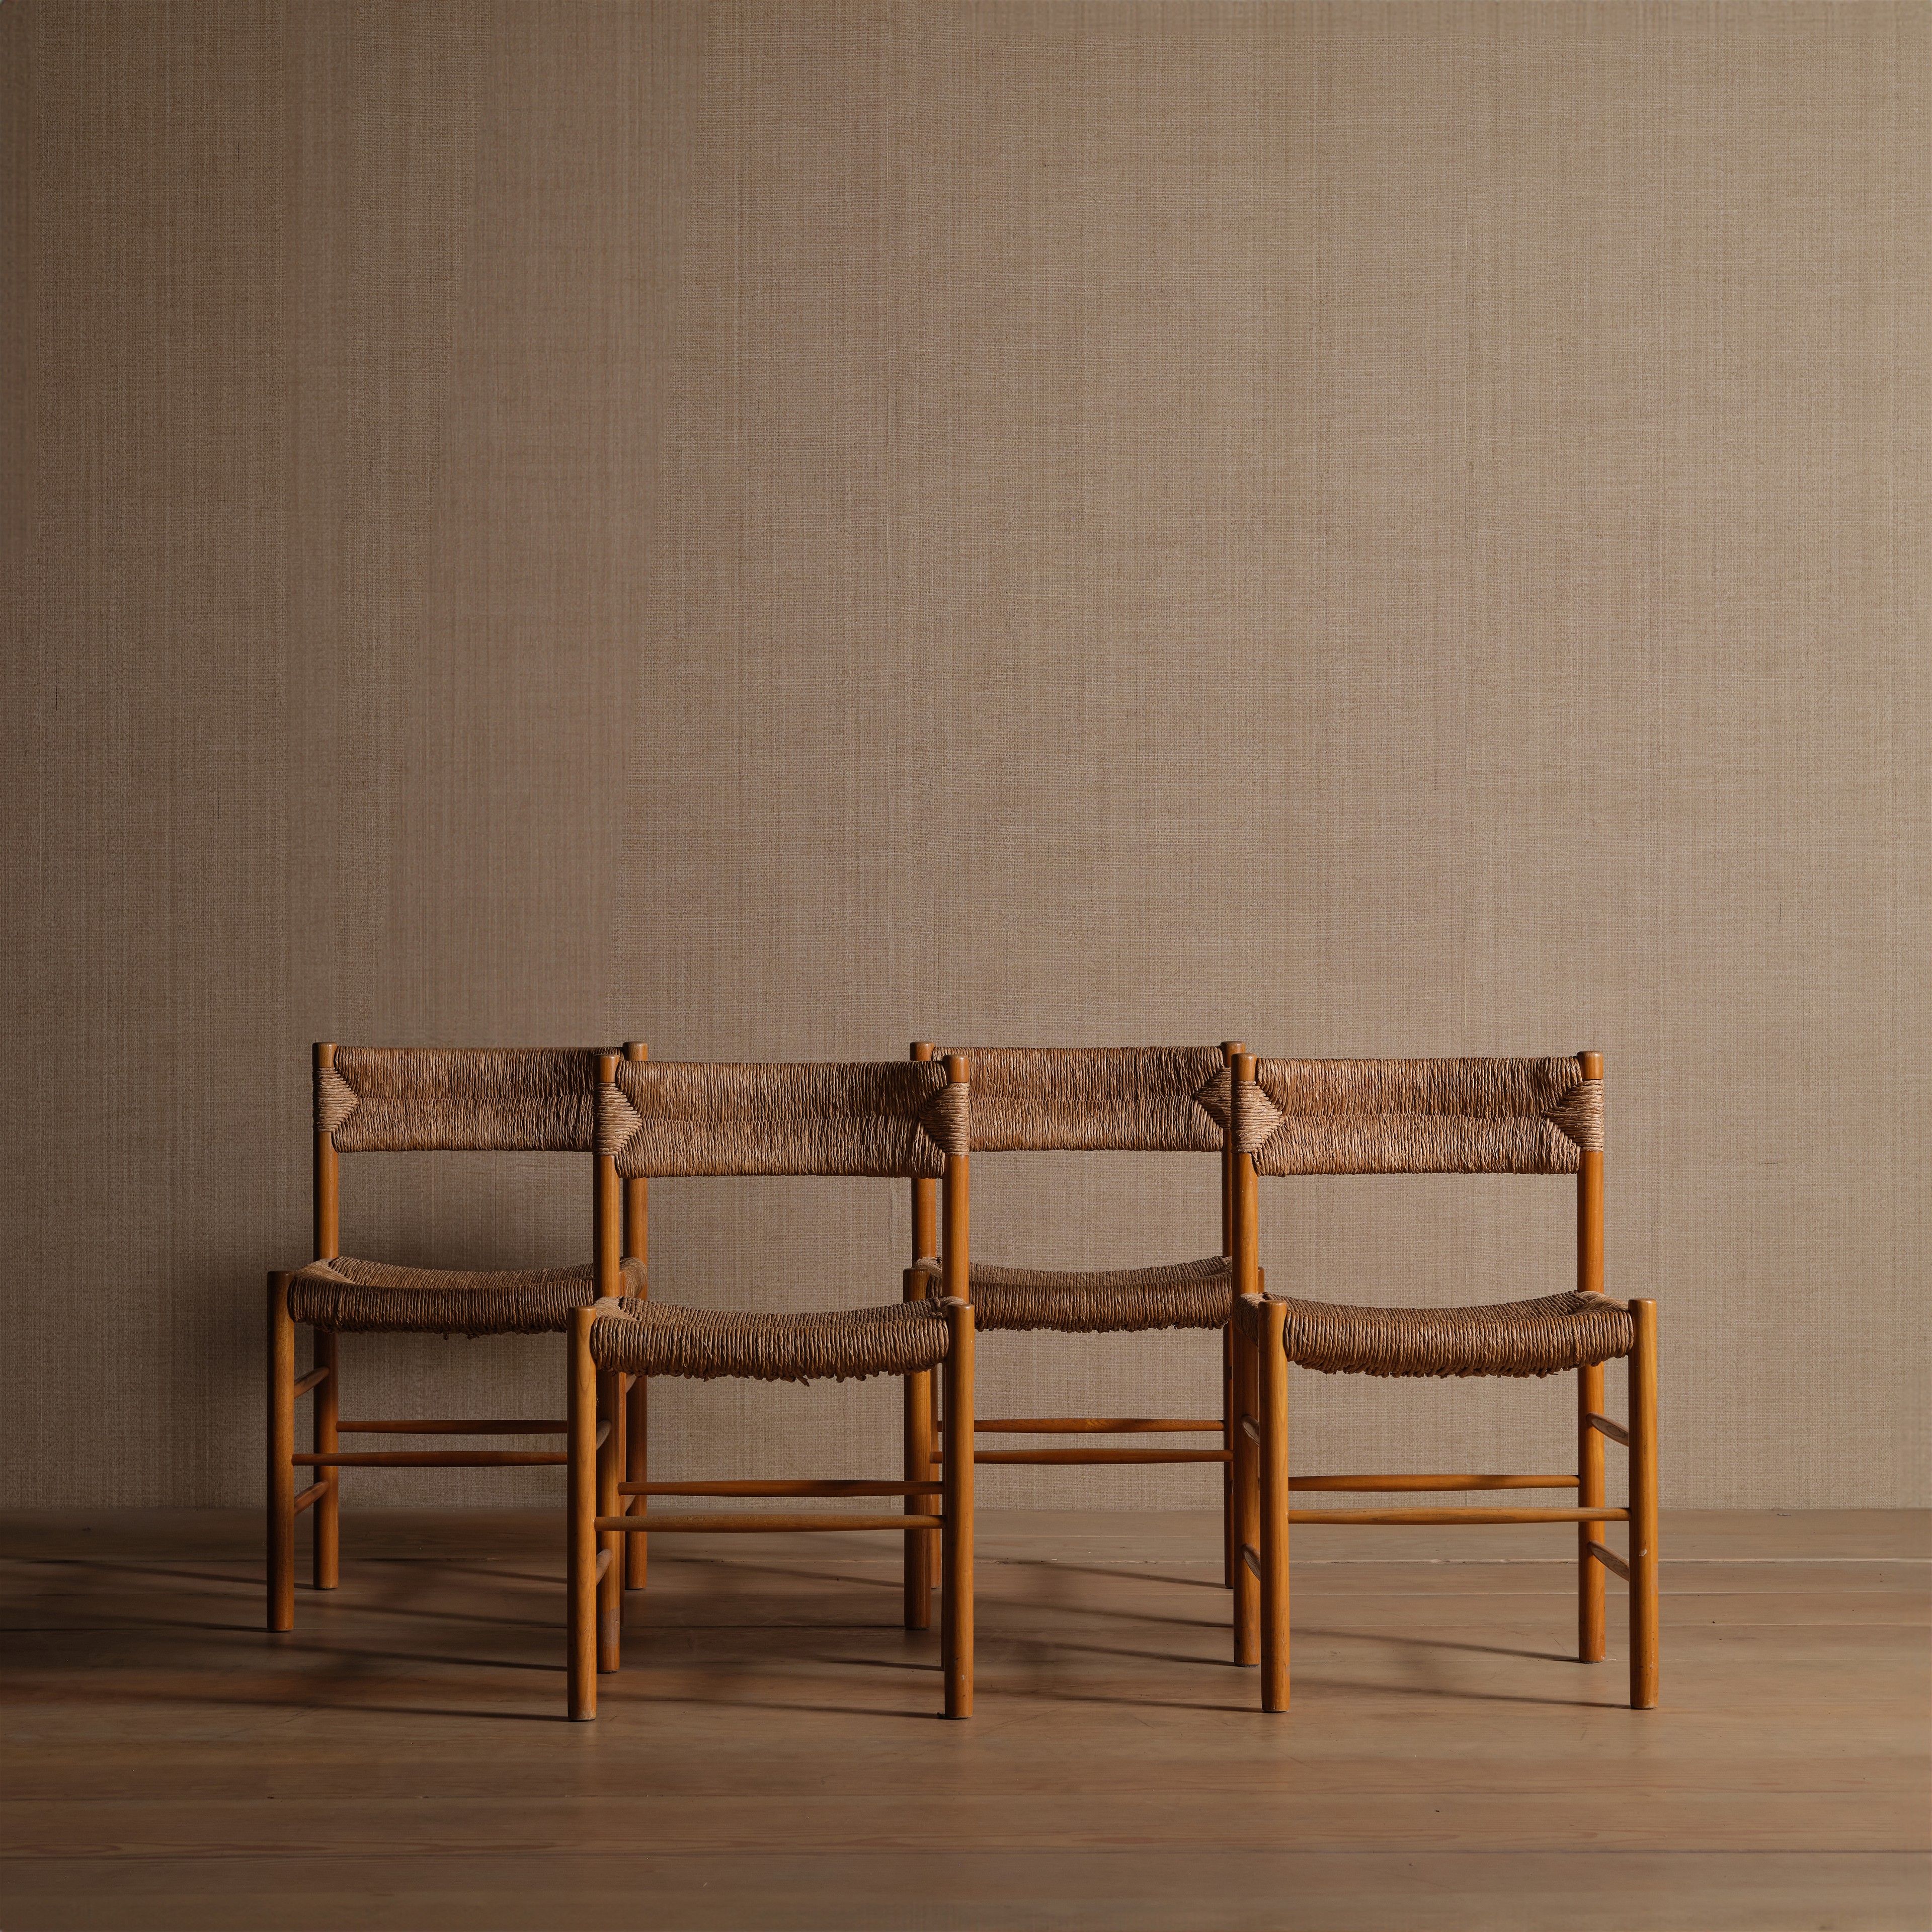 a group of three chairs sitting on top of a wooden floor